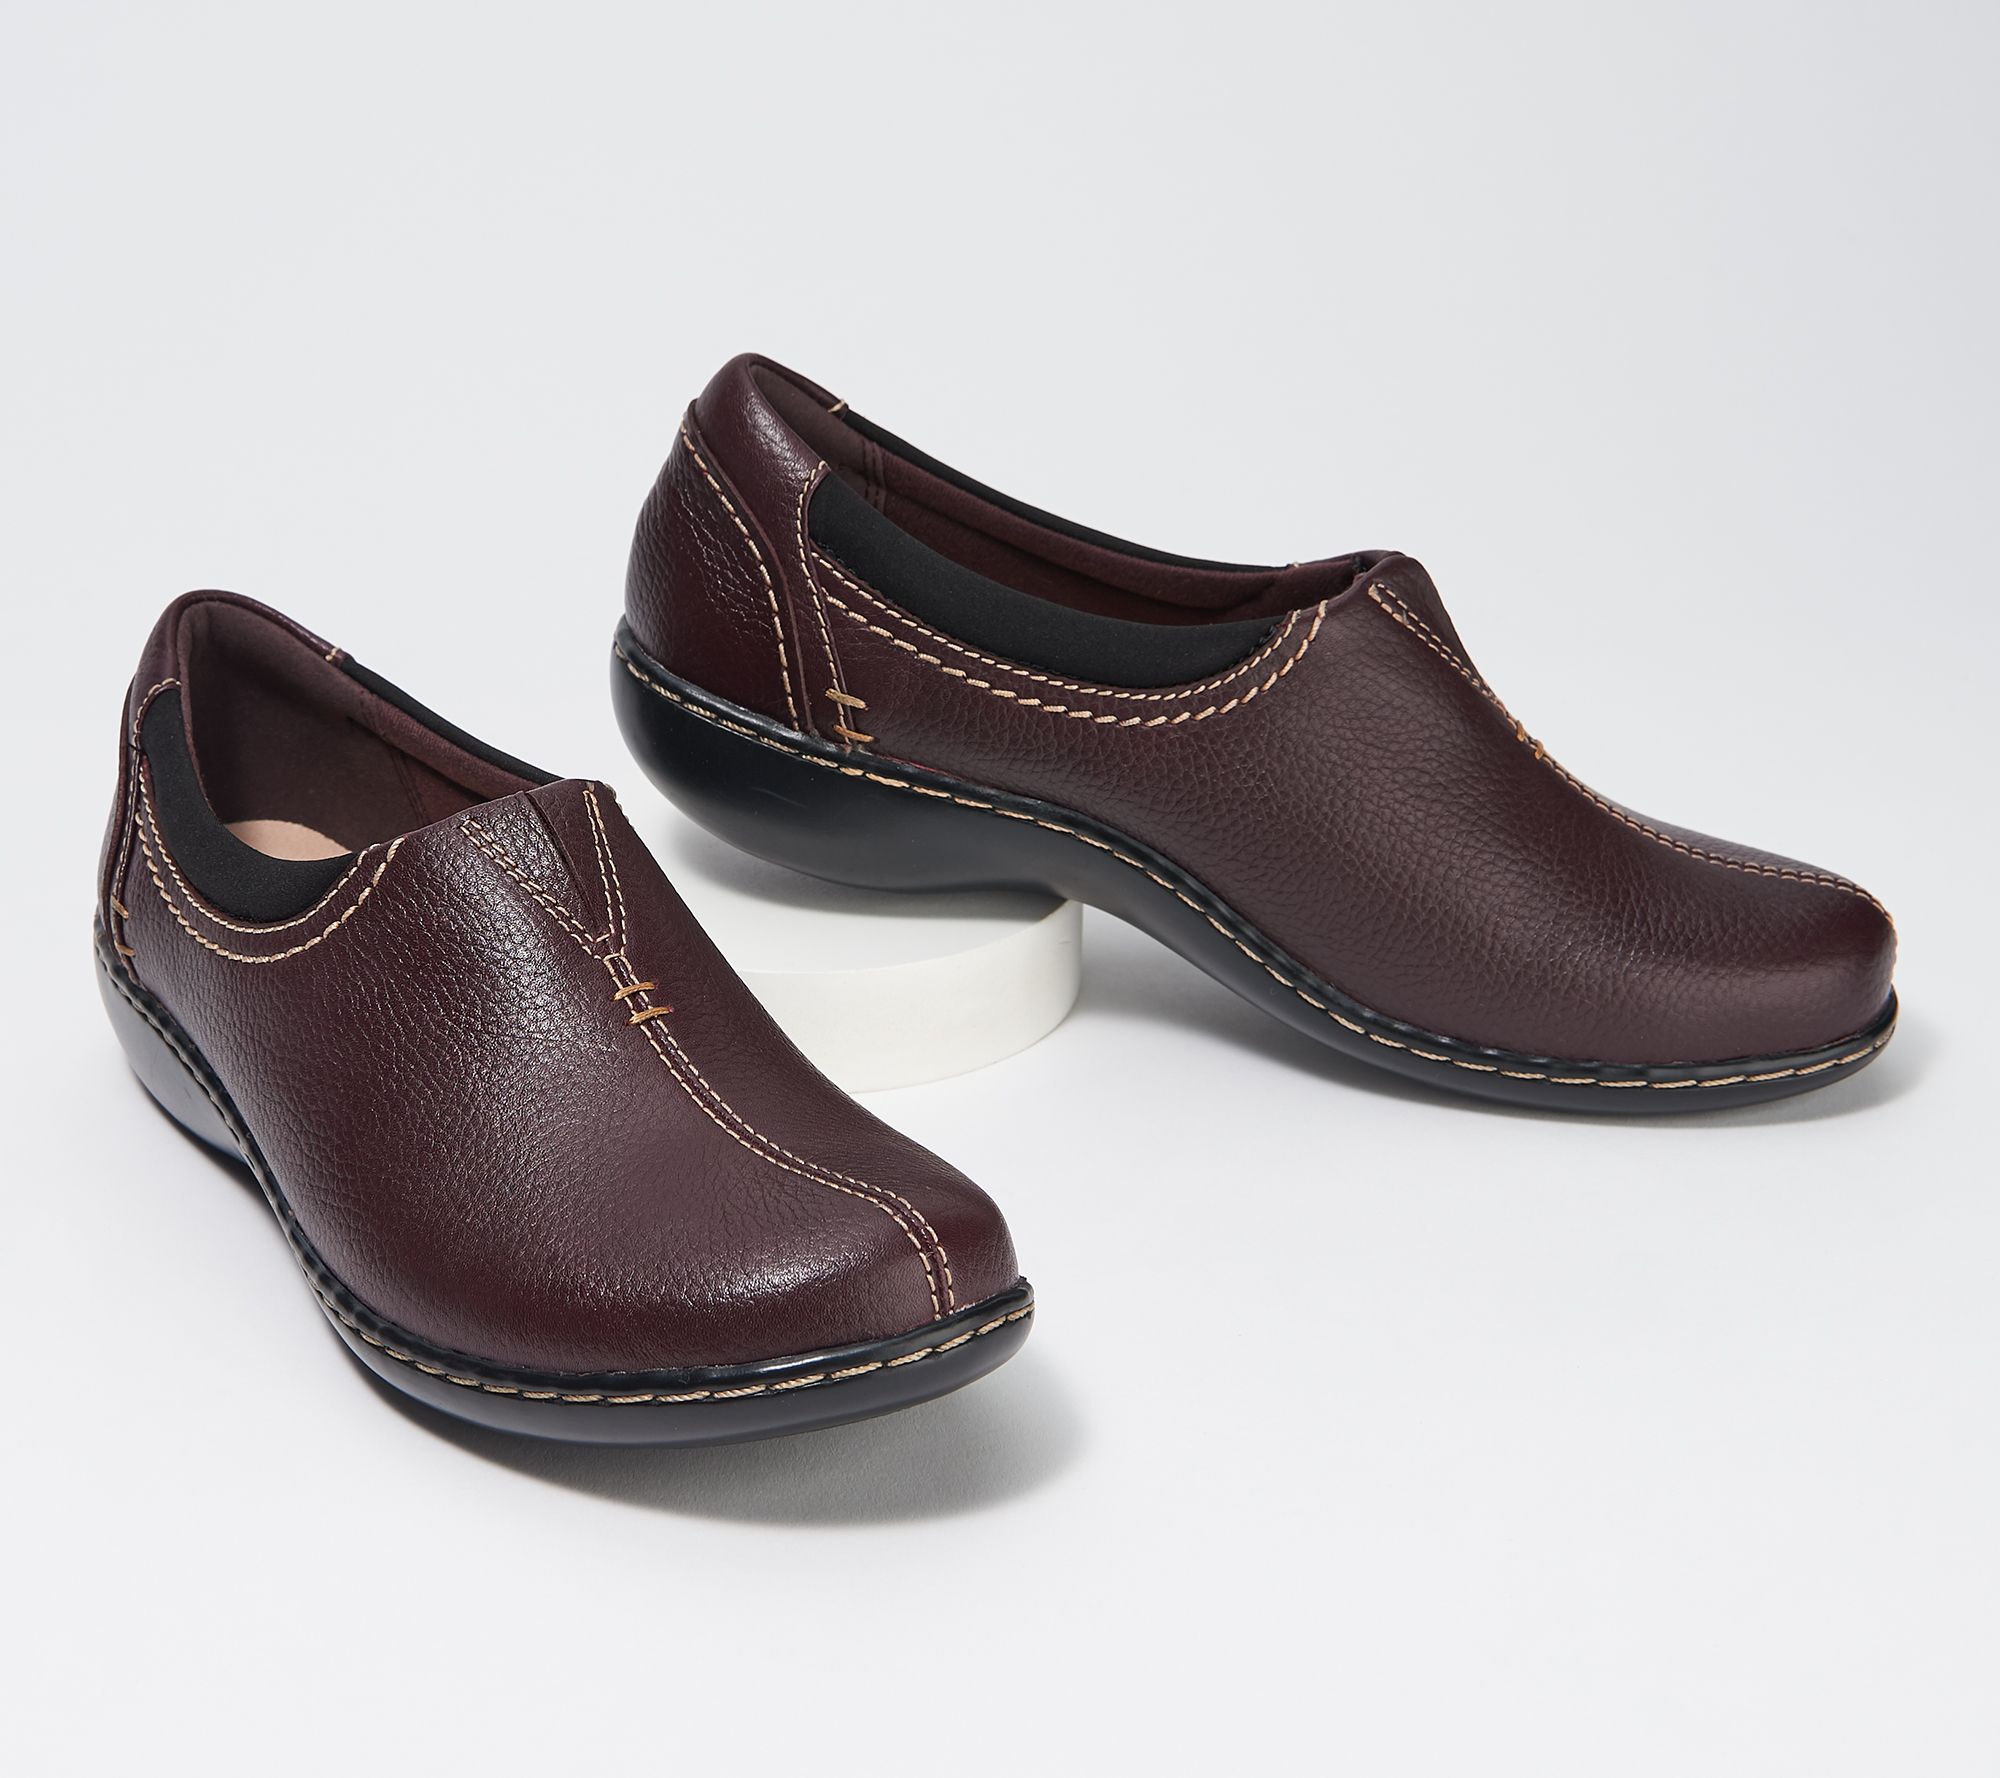 clarks shoes at qvc